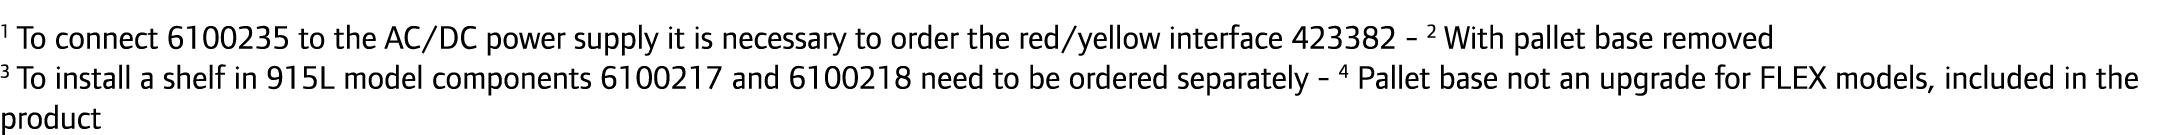 1 To connect 6100235 to the AC/DC power supply it is necessary to order the red/yellow interface 423382 - 2 With pall...